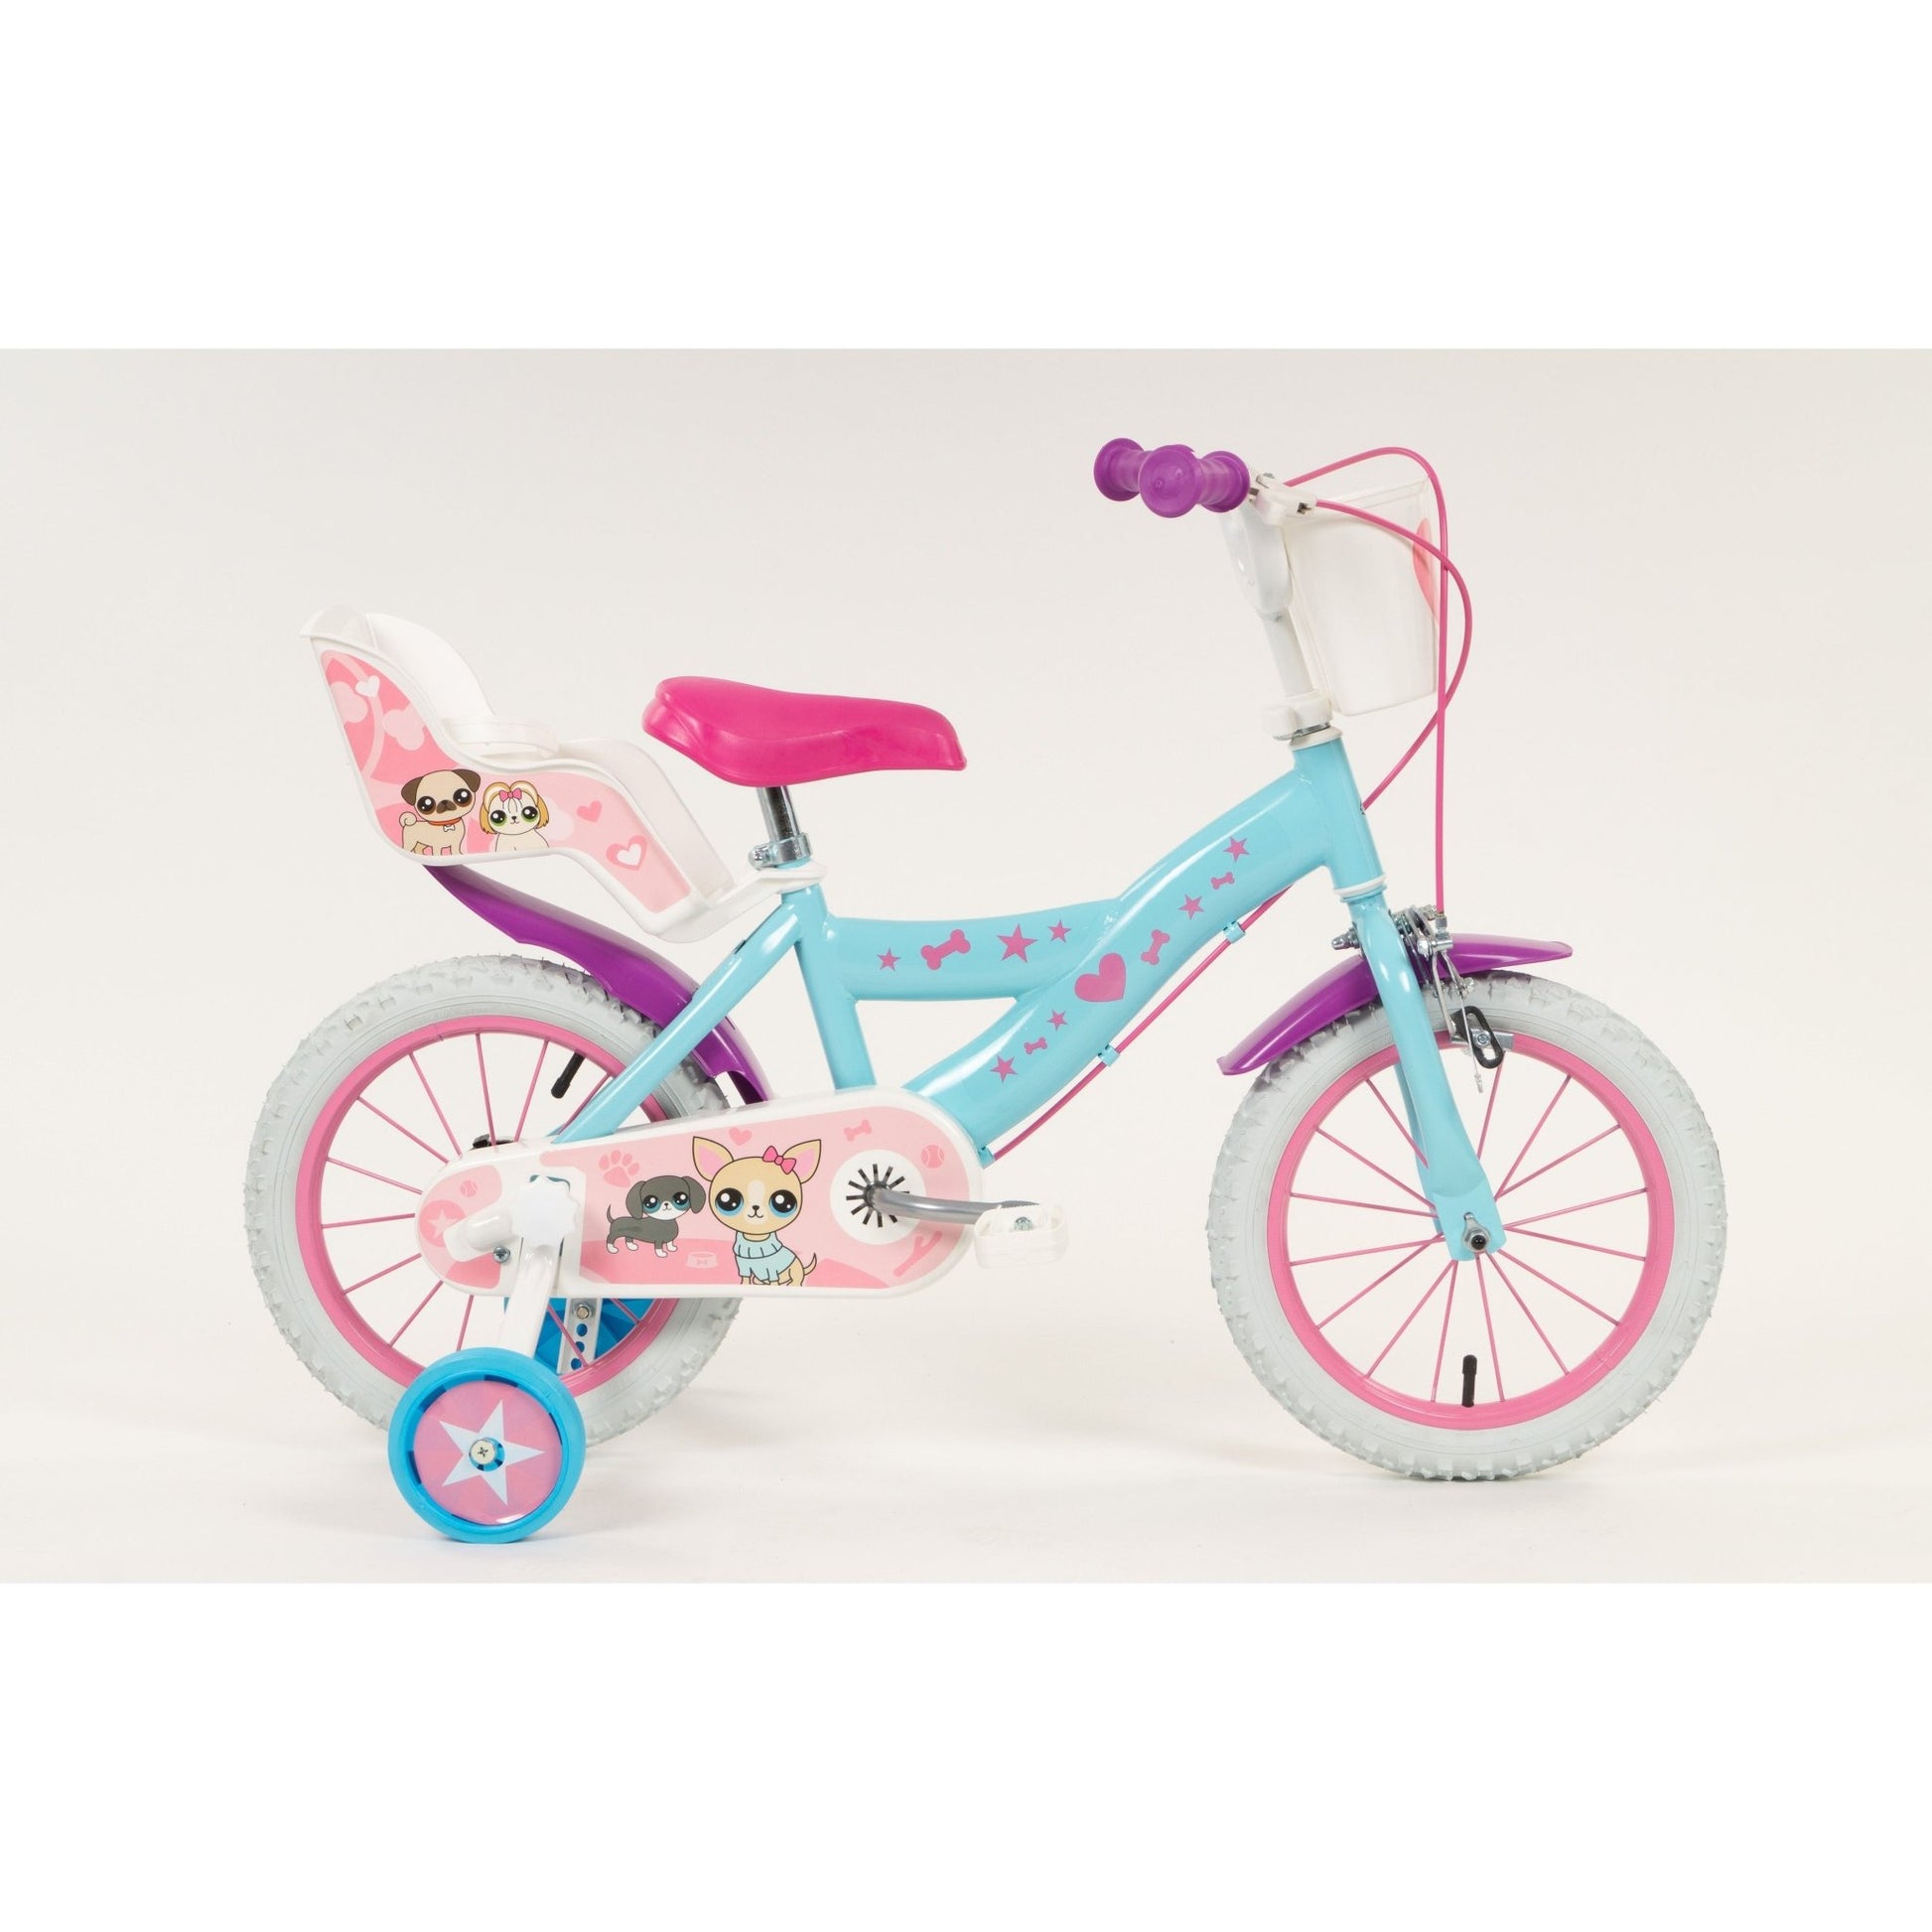 Pets Childrens Bicycle - Available in 3 Sizes - The Online Toy Shop - Bicycle - 15